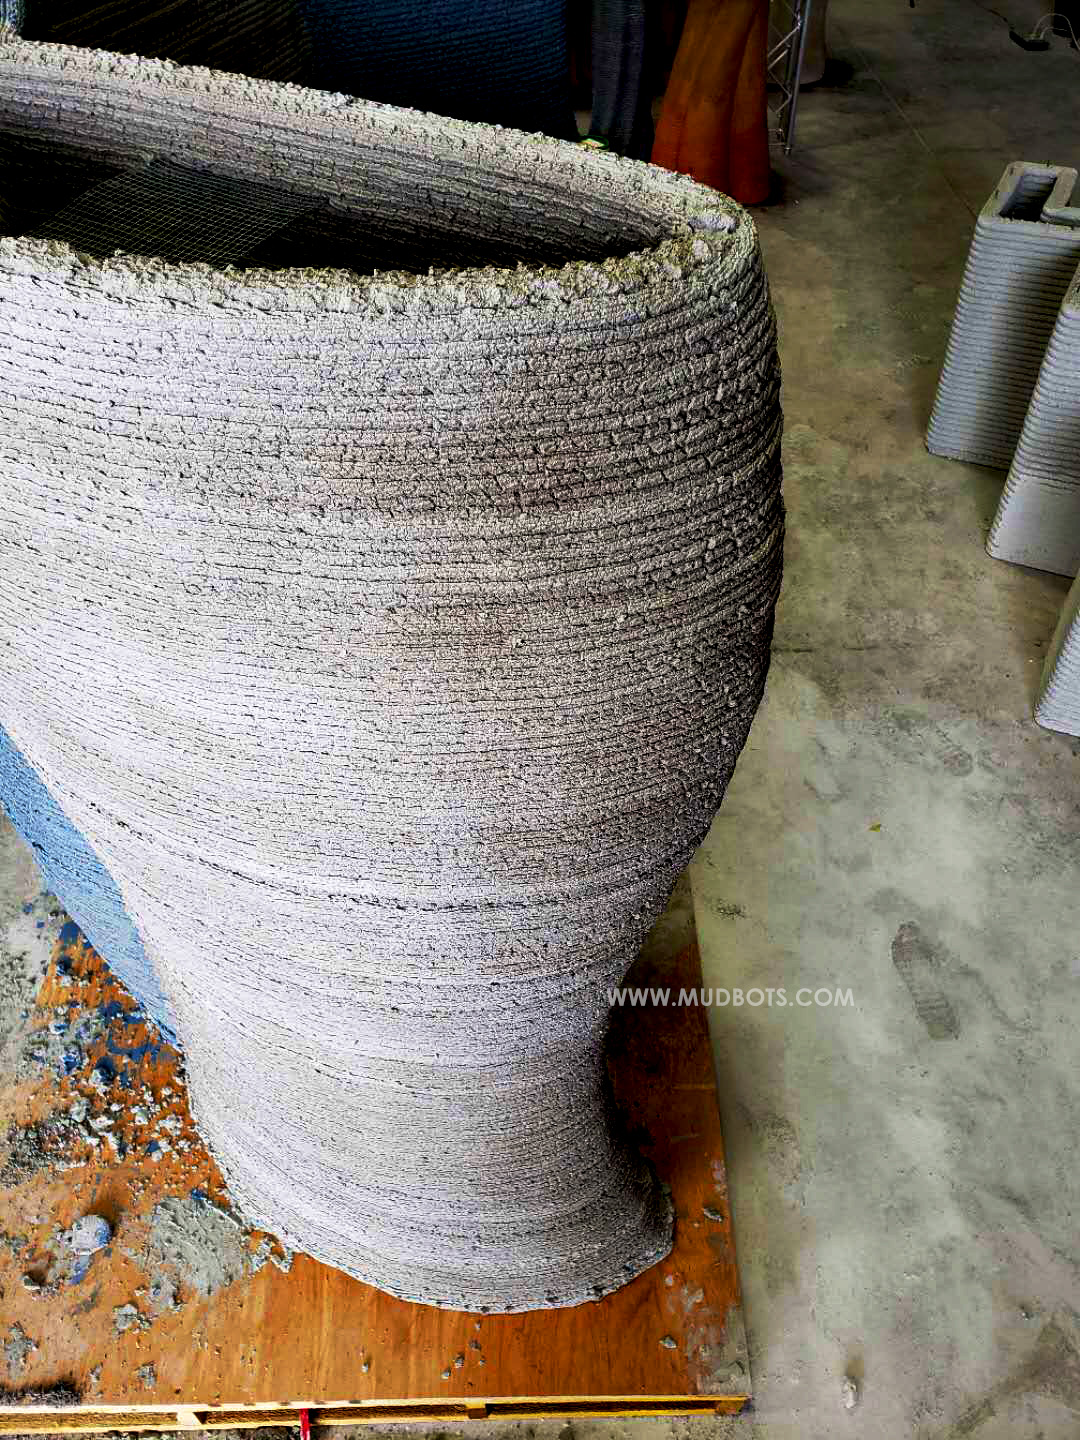 Print tall, cylindrical concrete structures with varying size and shapes.